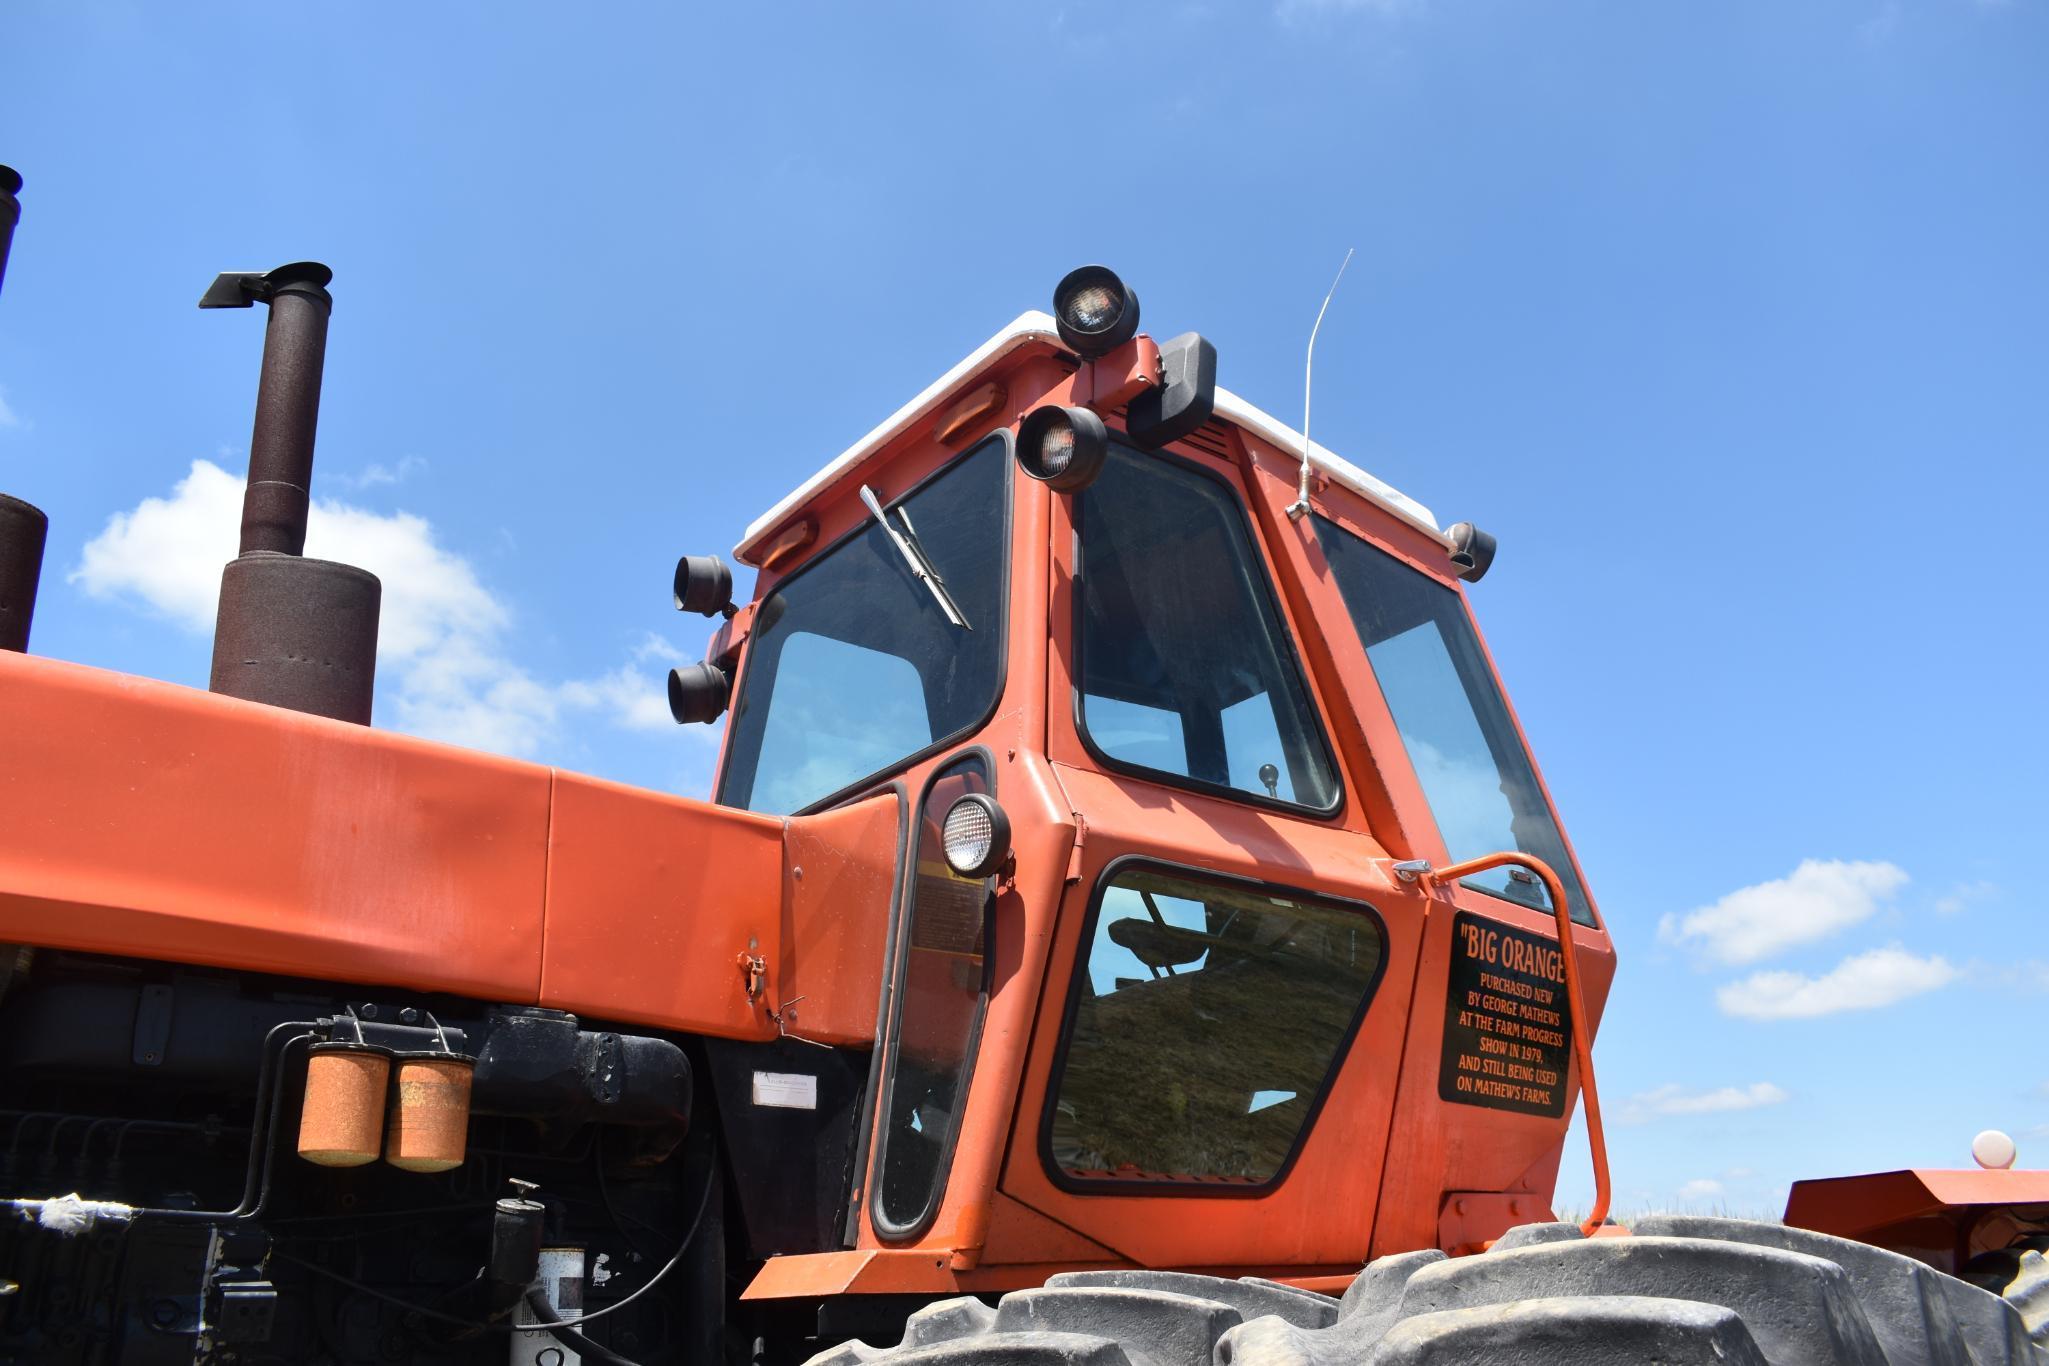 1979 Allis-Chalmers 8550 4wd tractor